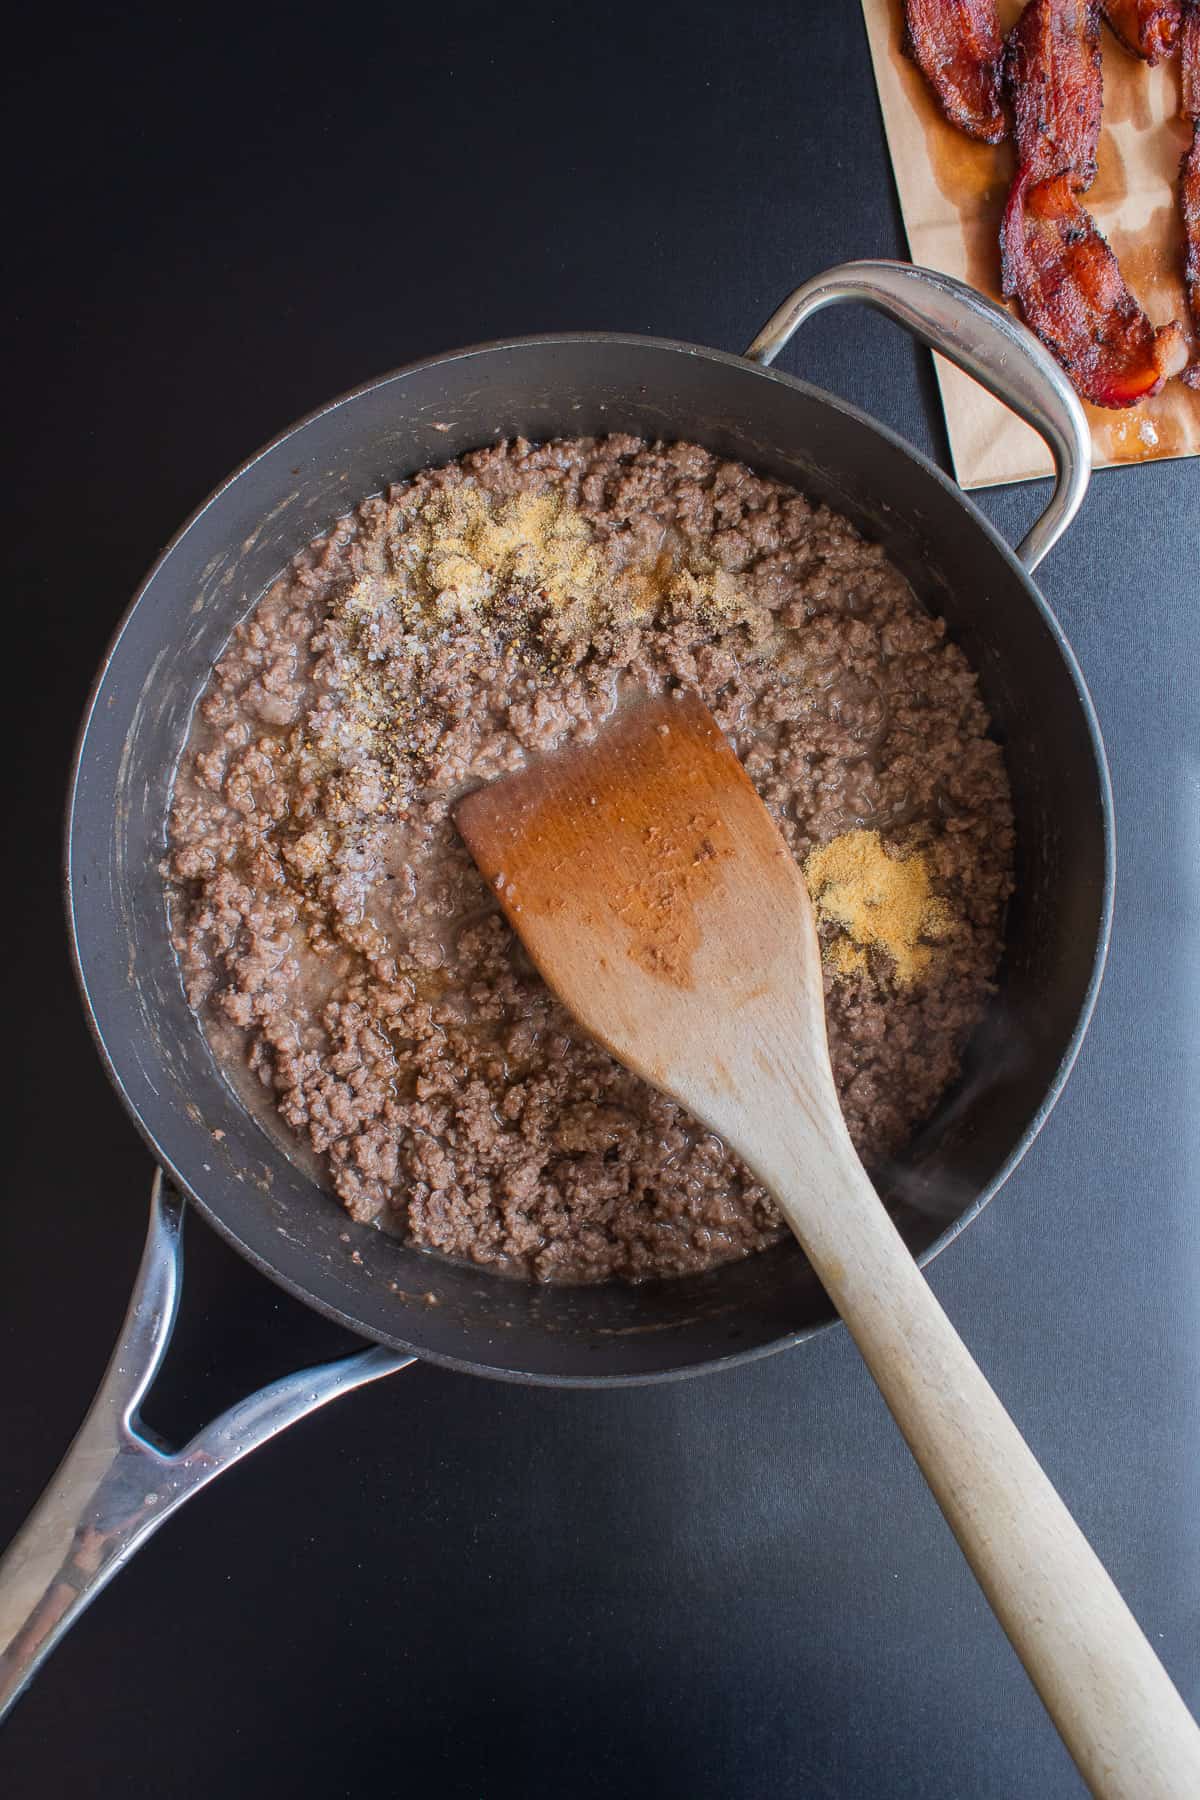 Spices and seasonings added to the browned ground beef in a skillet.